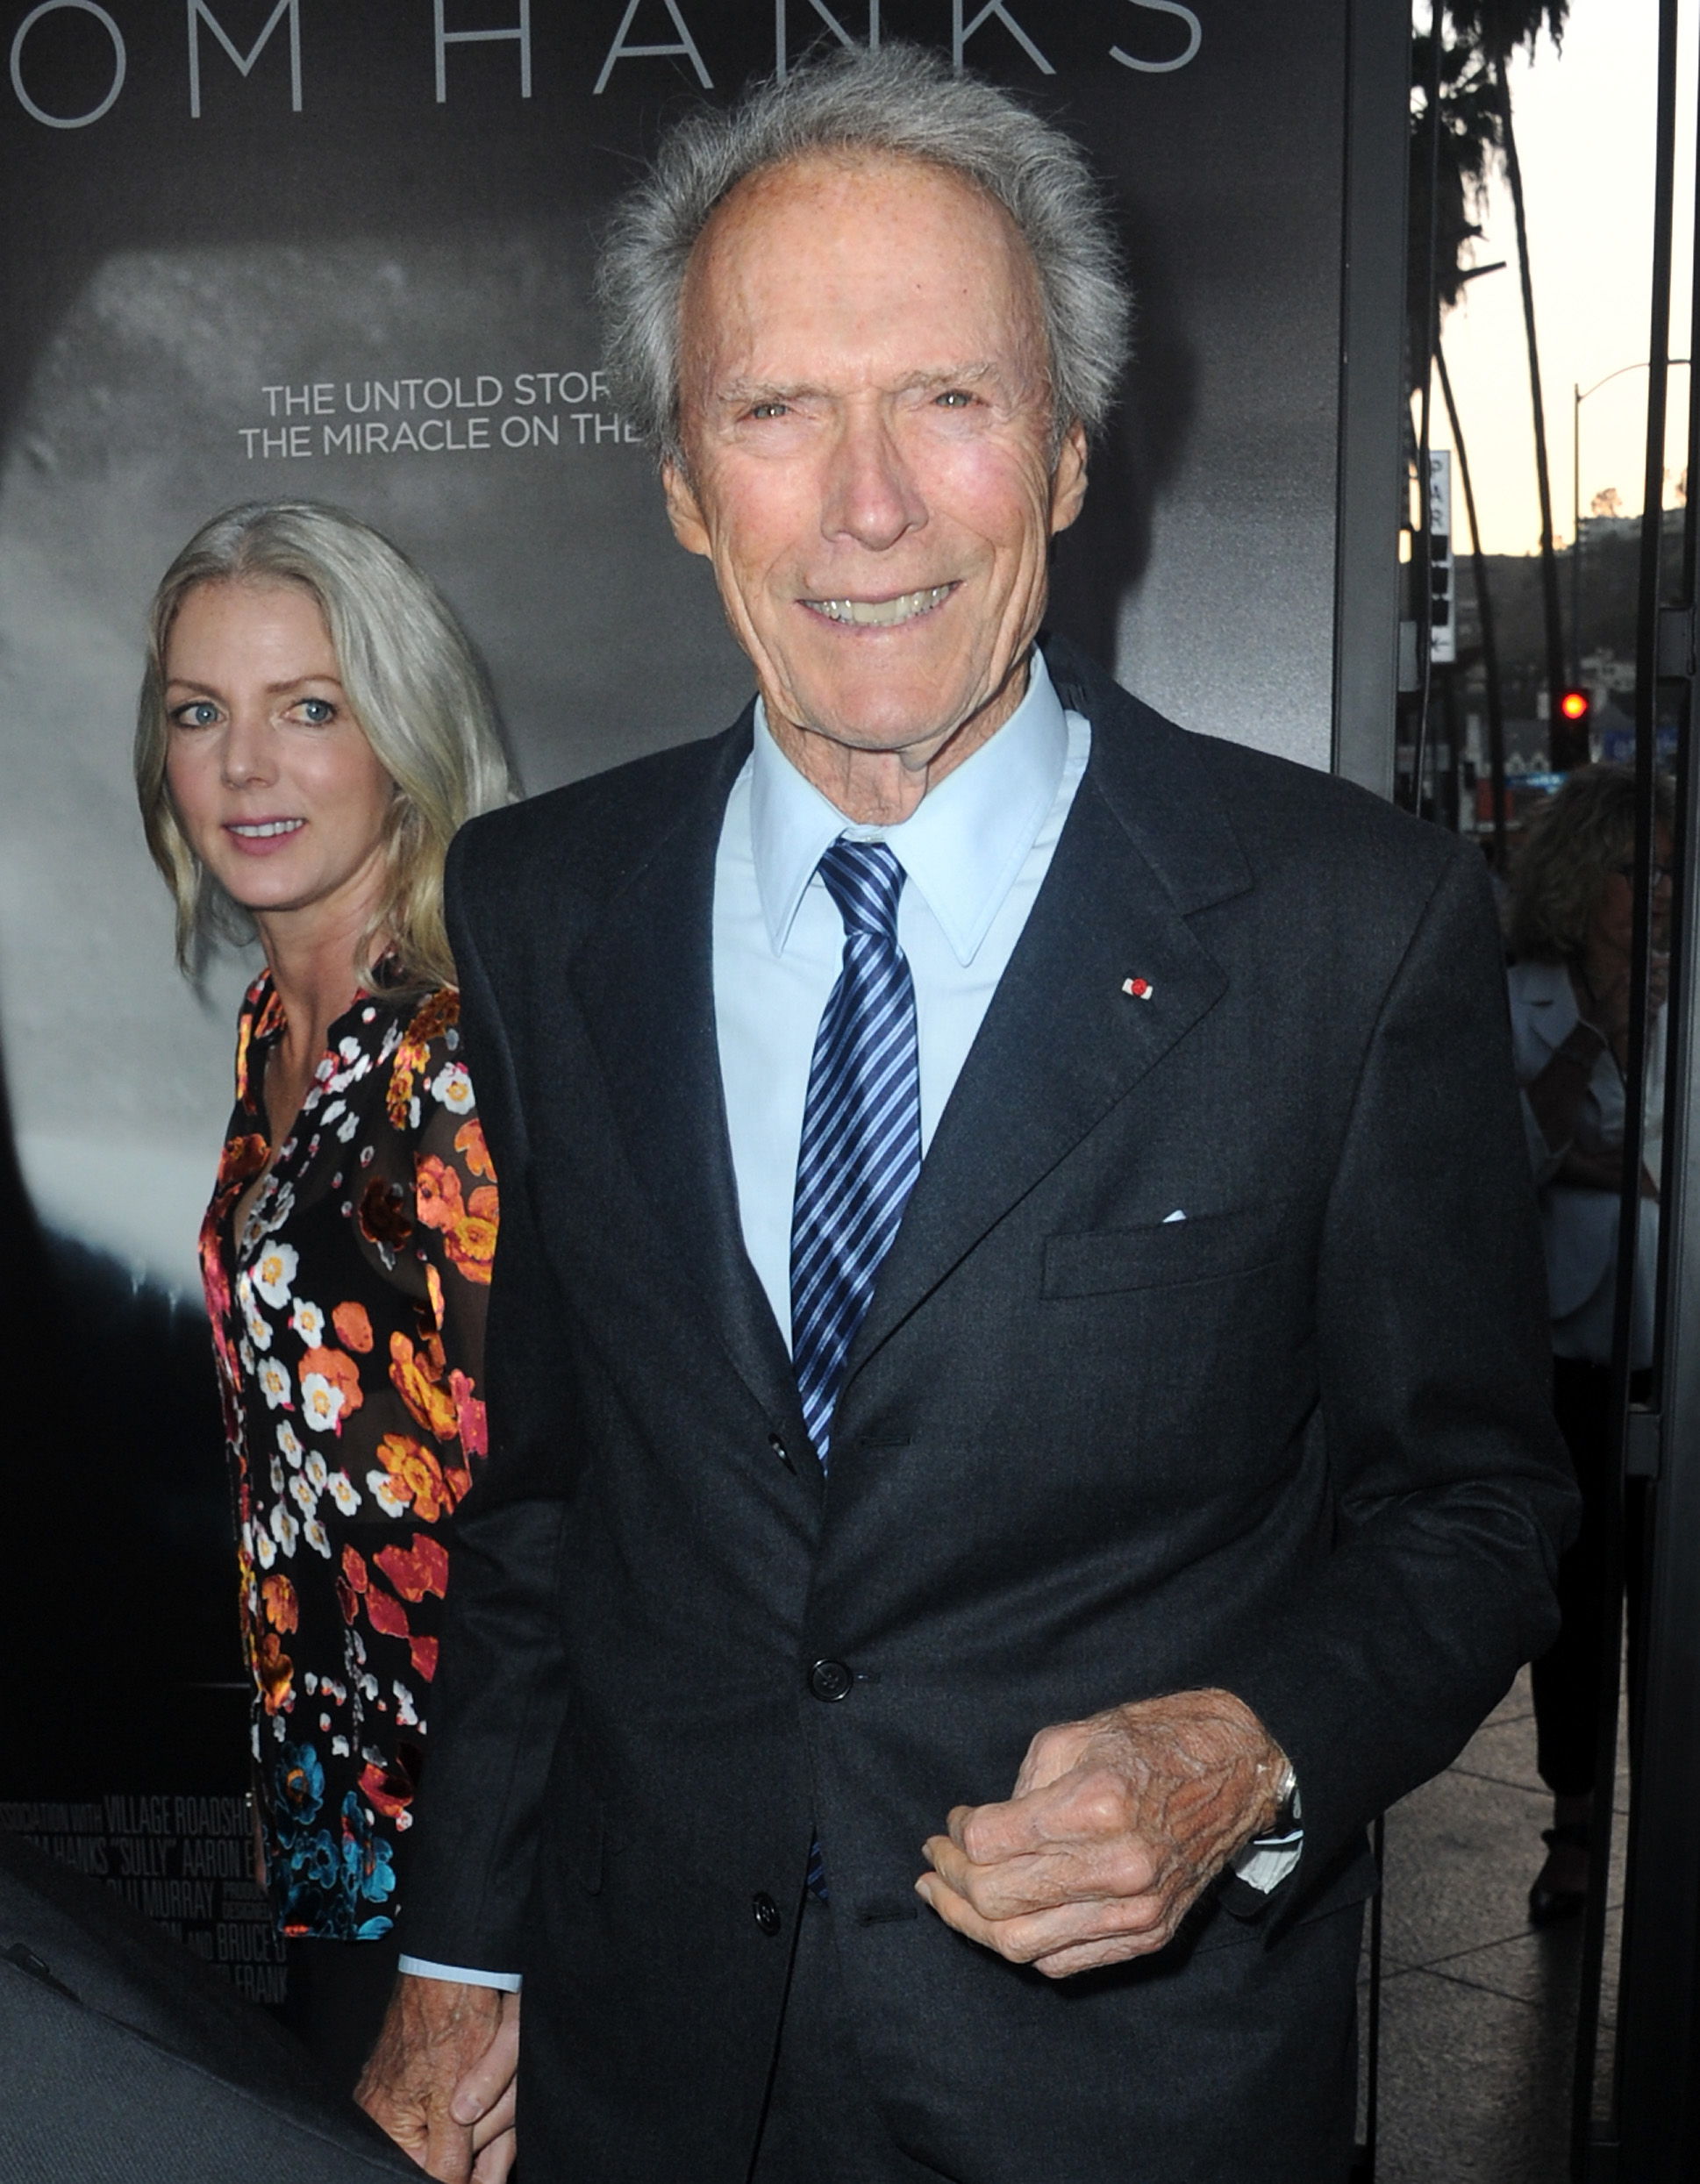 Clint Eastwood at the screening of "Sully" in Los Angeles, California on September 8, 2016 | Source: Getty Images